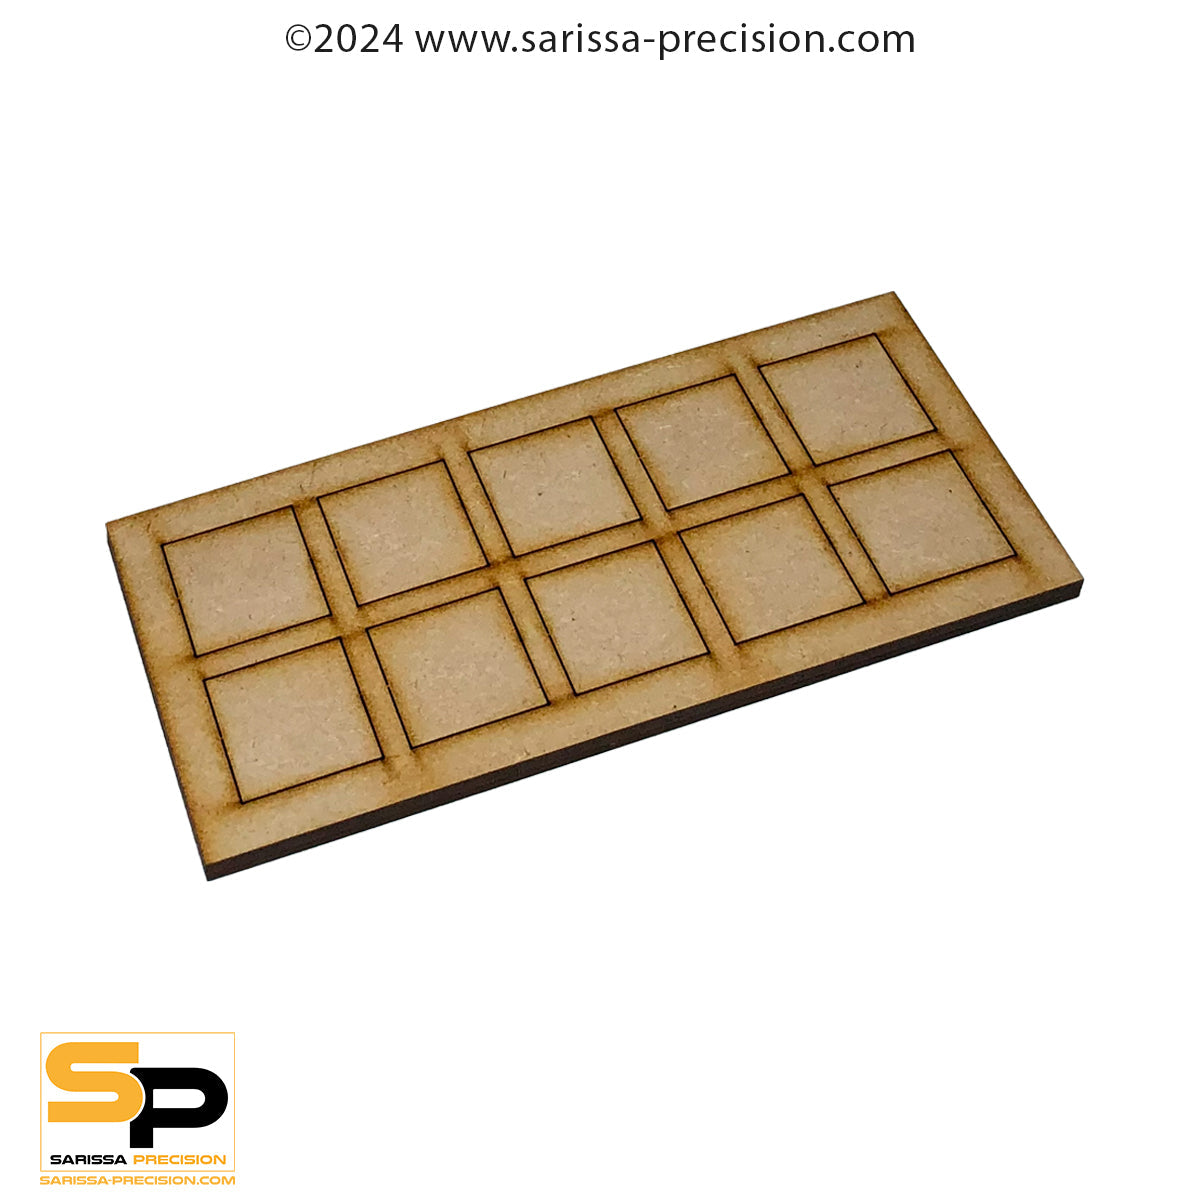 2x2 30x30mm Conversion Tray for 25x25mm bases